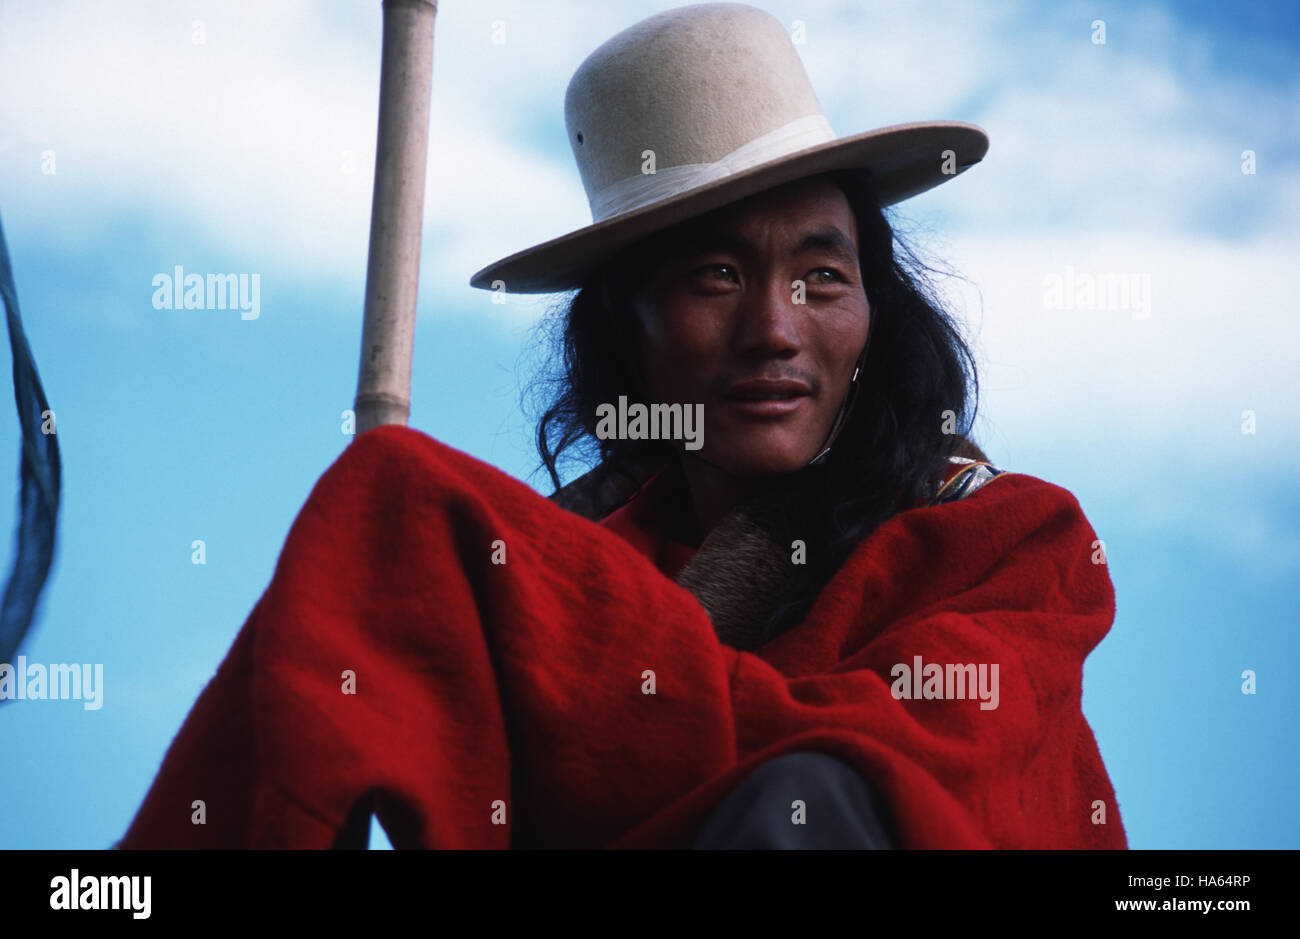 Caption: Ser'xu, Sichuan, China - Aug 2002. A Khampa man carrying the flag of his home tribe waits to ride in the open ceremony of the Ser'xu Horserac Stock Photo